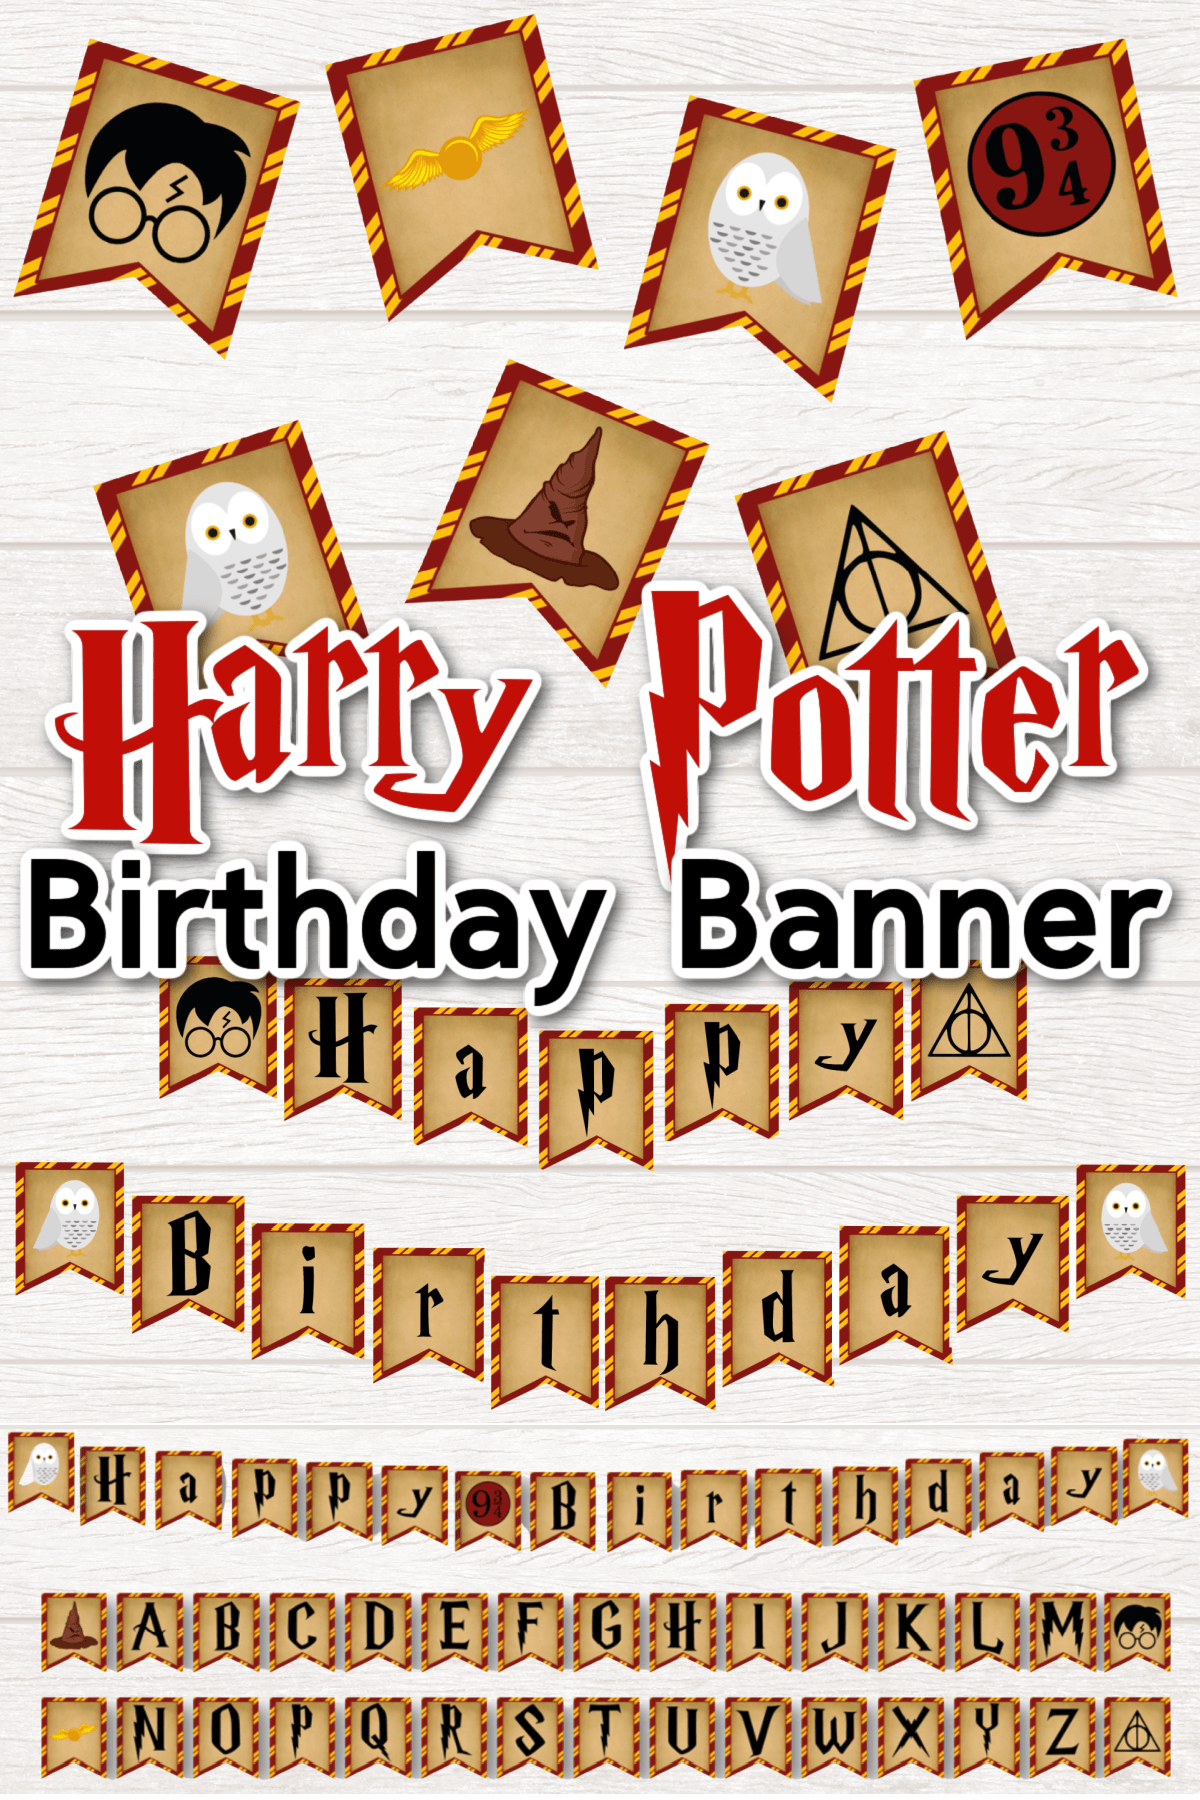 Harry Potter Birthday Banner With letters and images